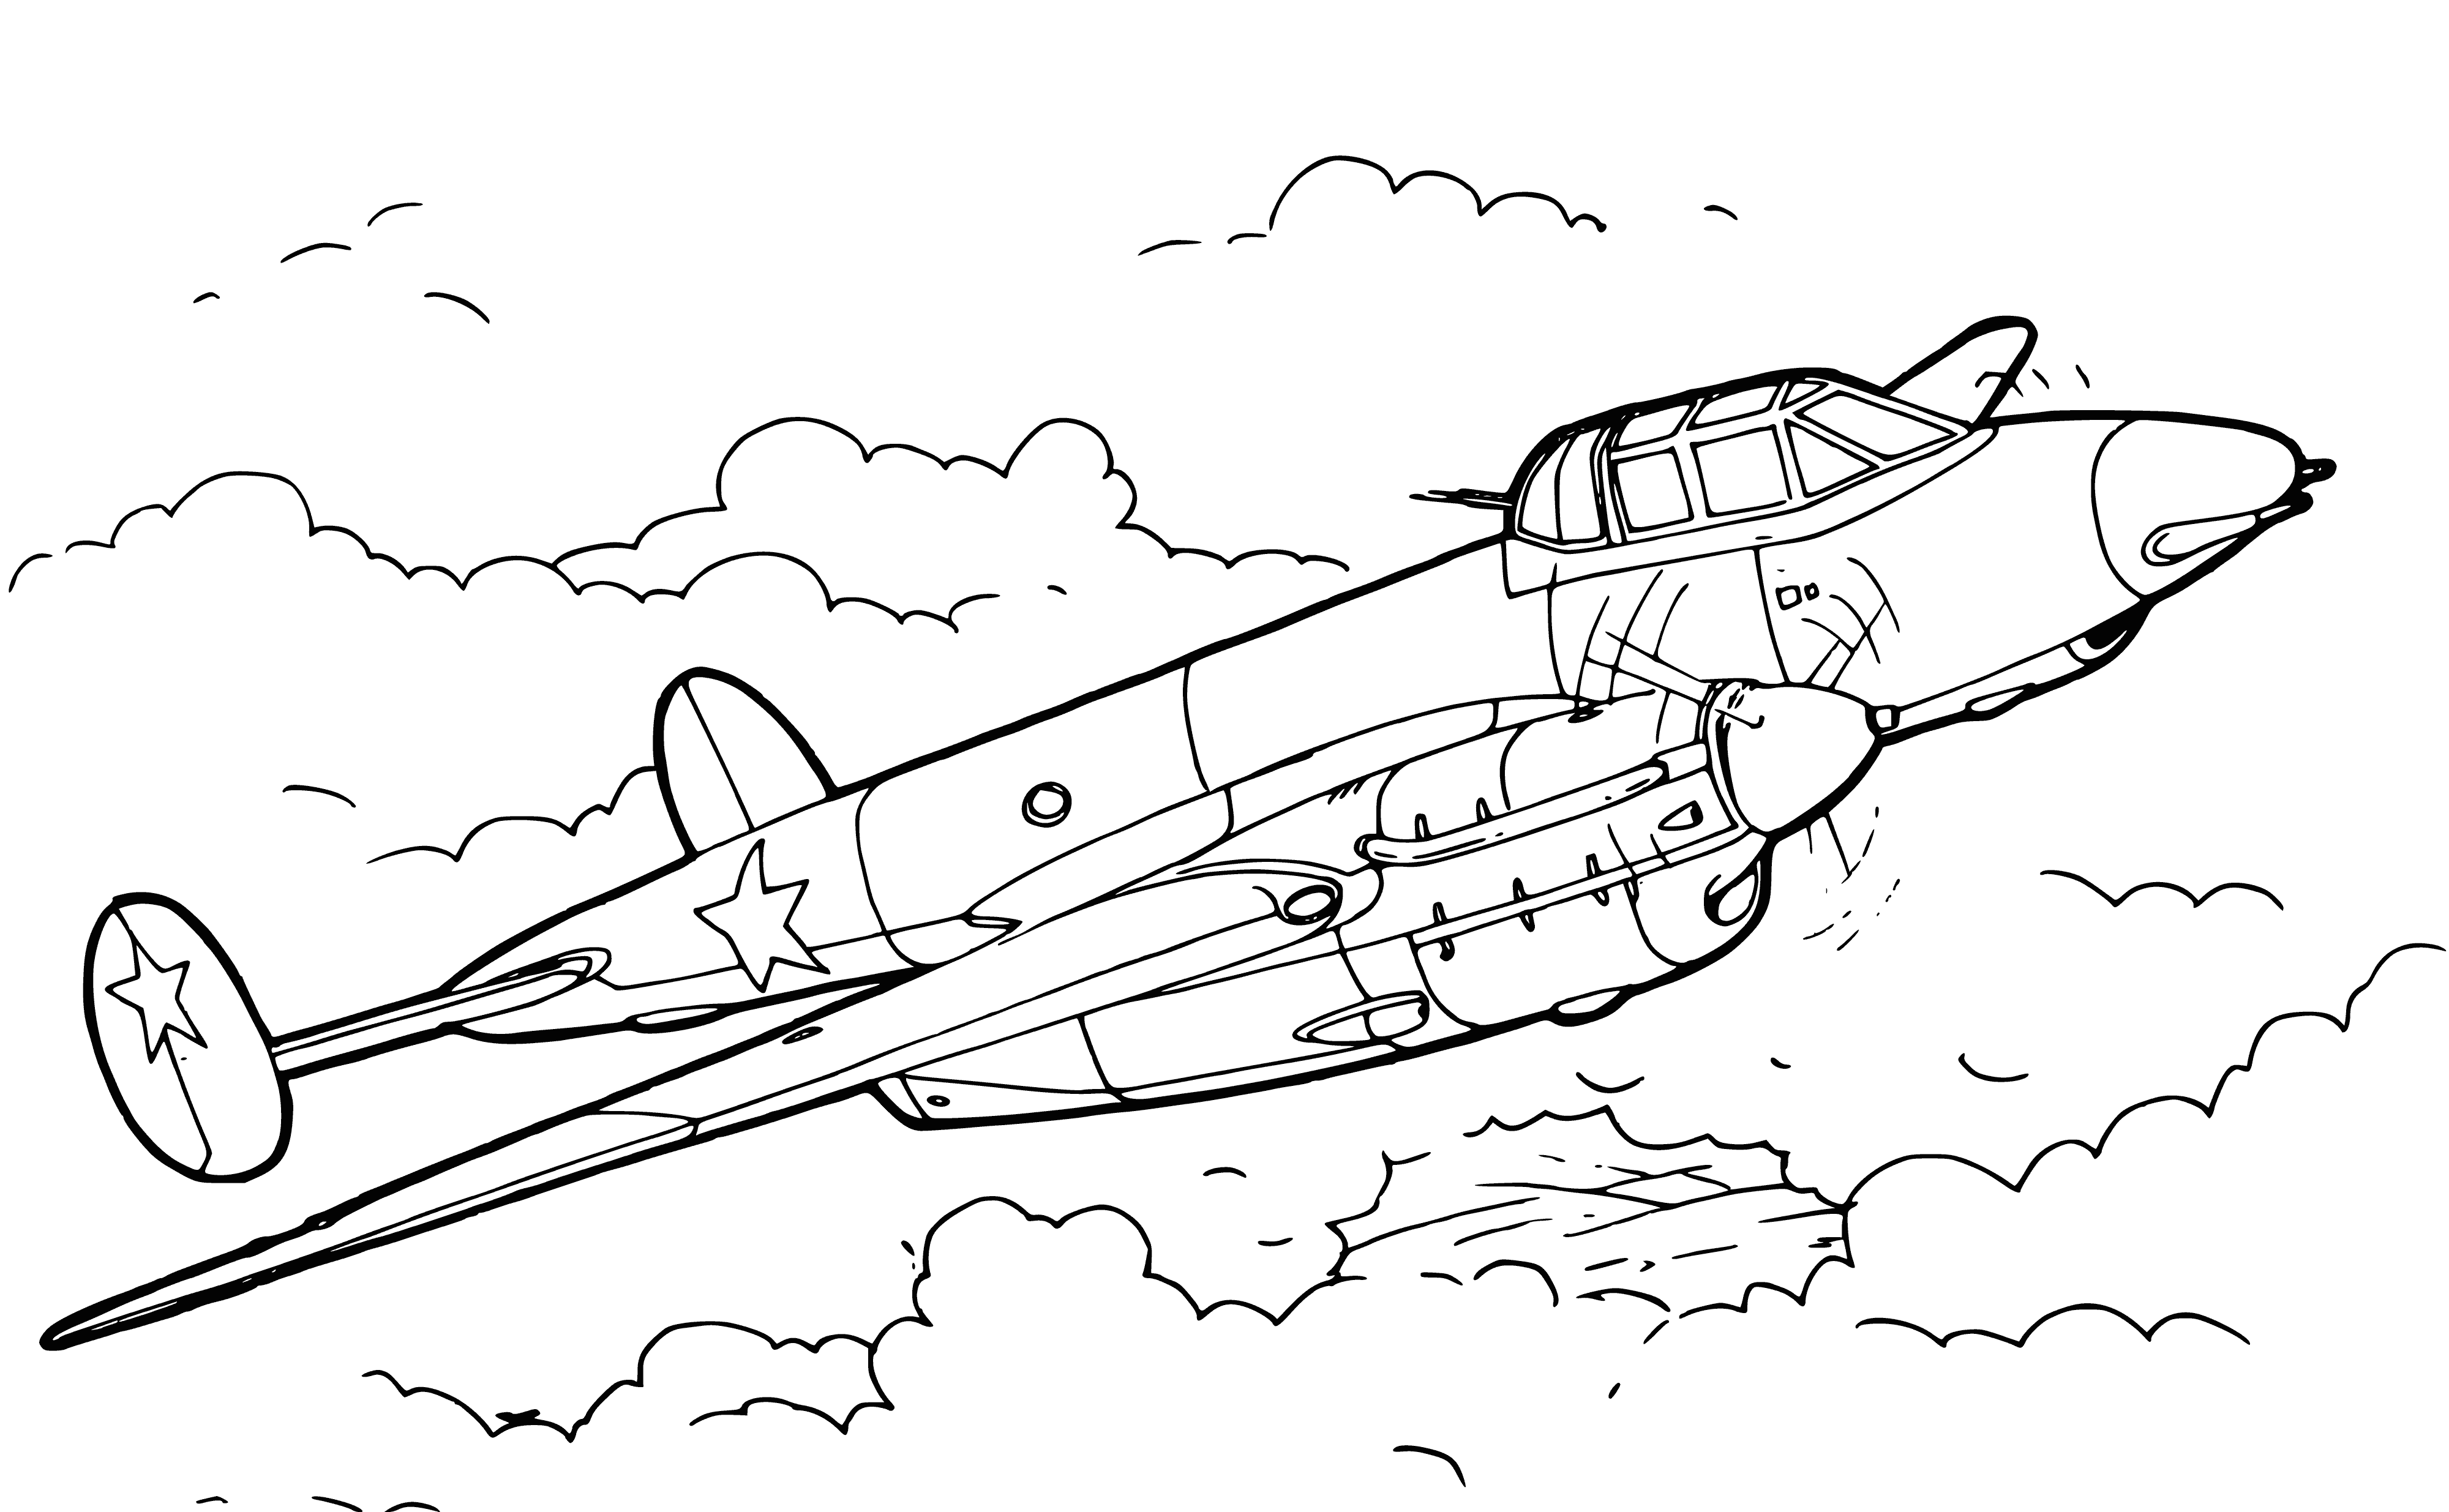 coloring page: WW2 Soviet Pe-3 bis fighter aircraft developed from Pe-3 with Klimov M-107 engine & 4-bladed propeller; armed with 3 23mm cannon & 2x100kg bombs.